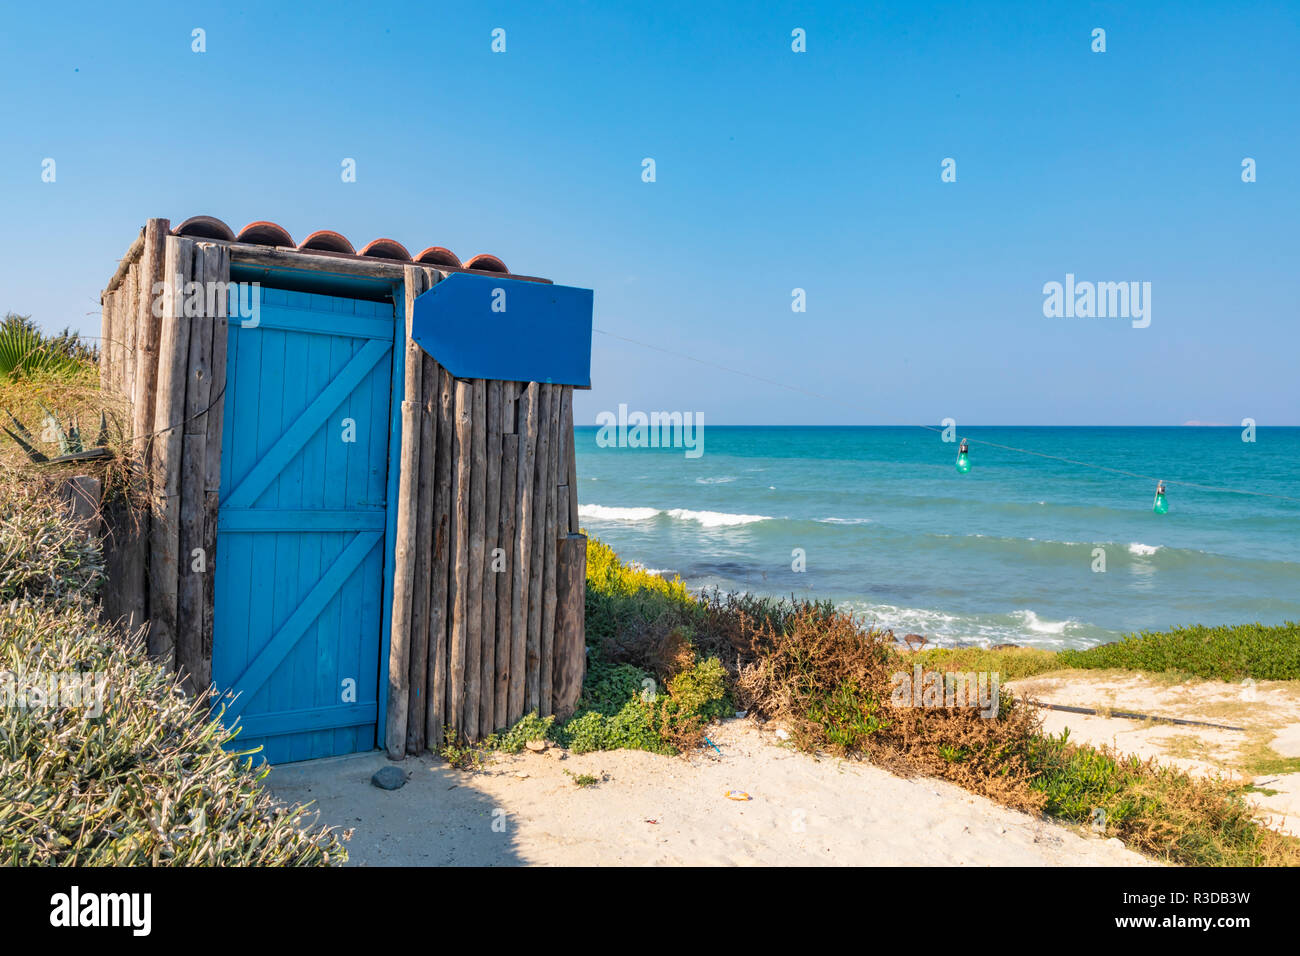 View of a small wooden cabin on the shore of the azure Mediterranean Sea, with a sign that can be used as a placeholder for your own personalised mess Stock Photo